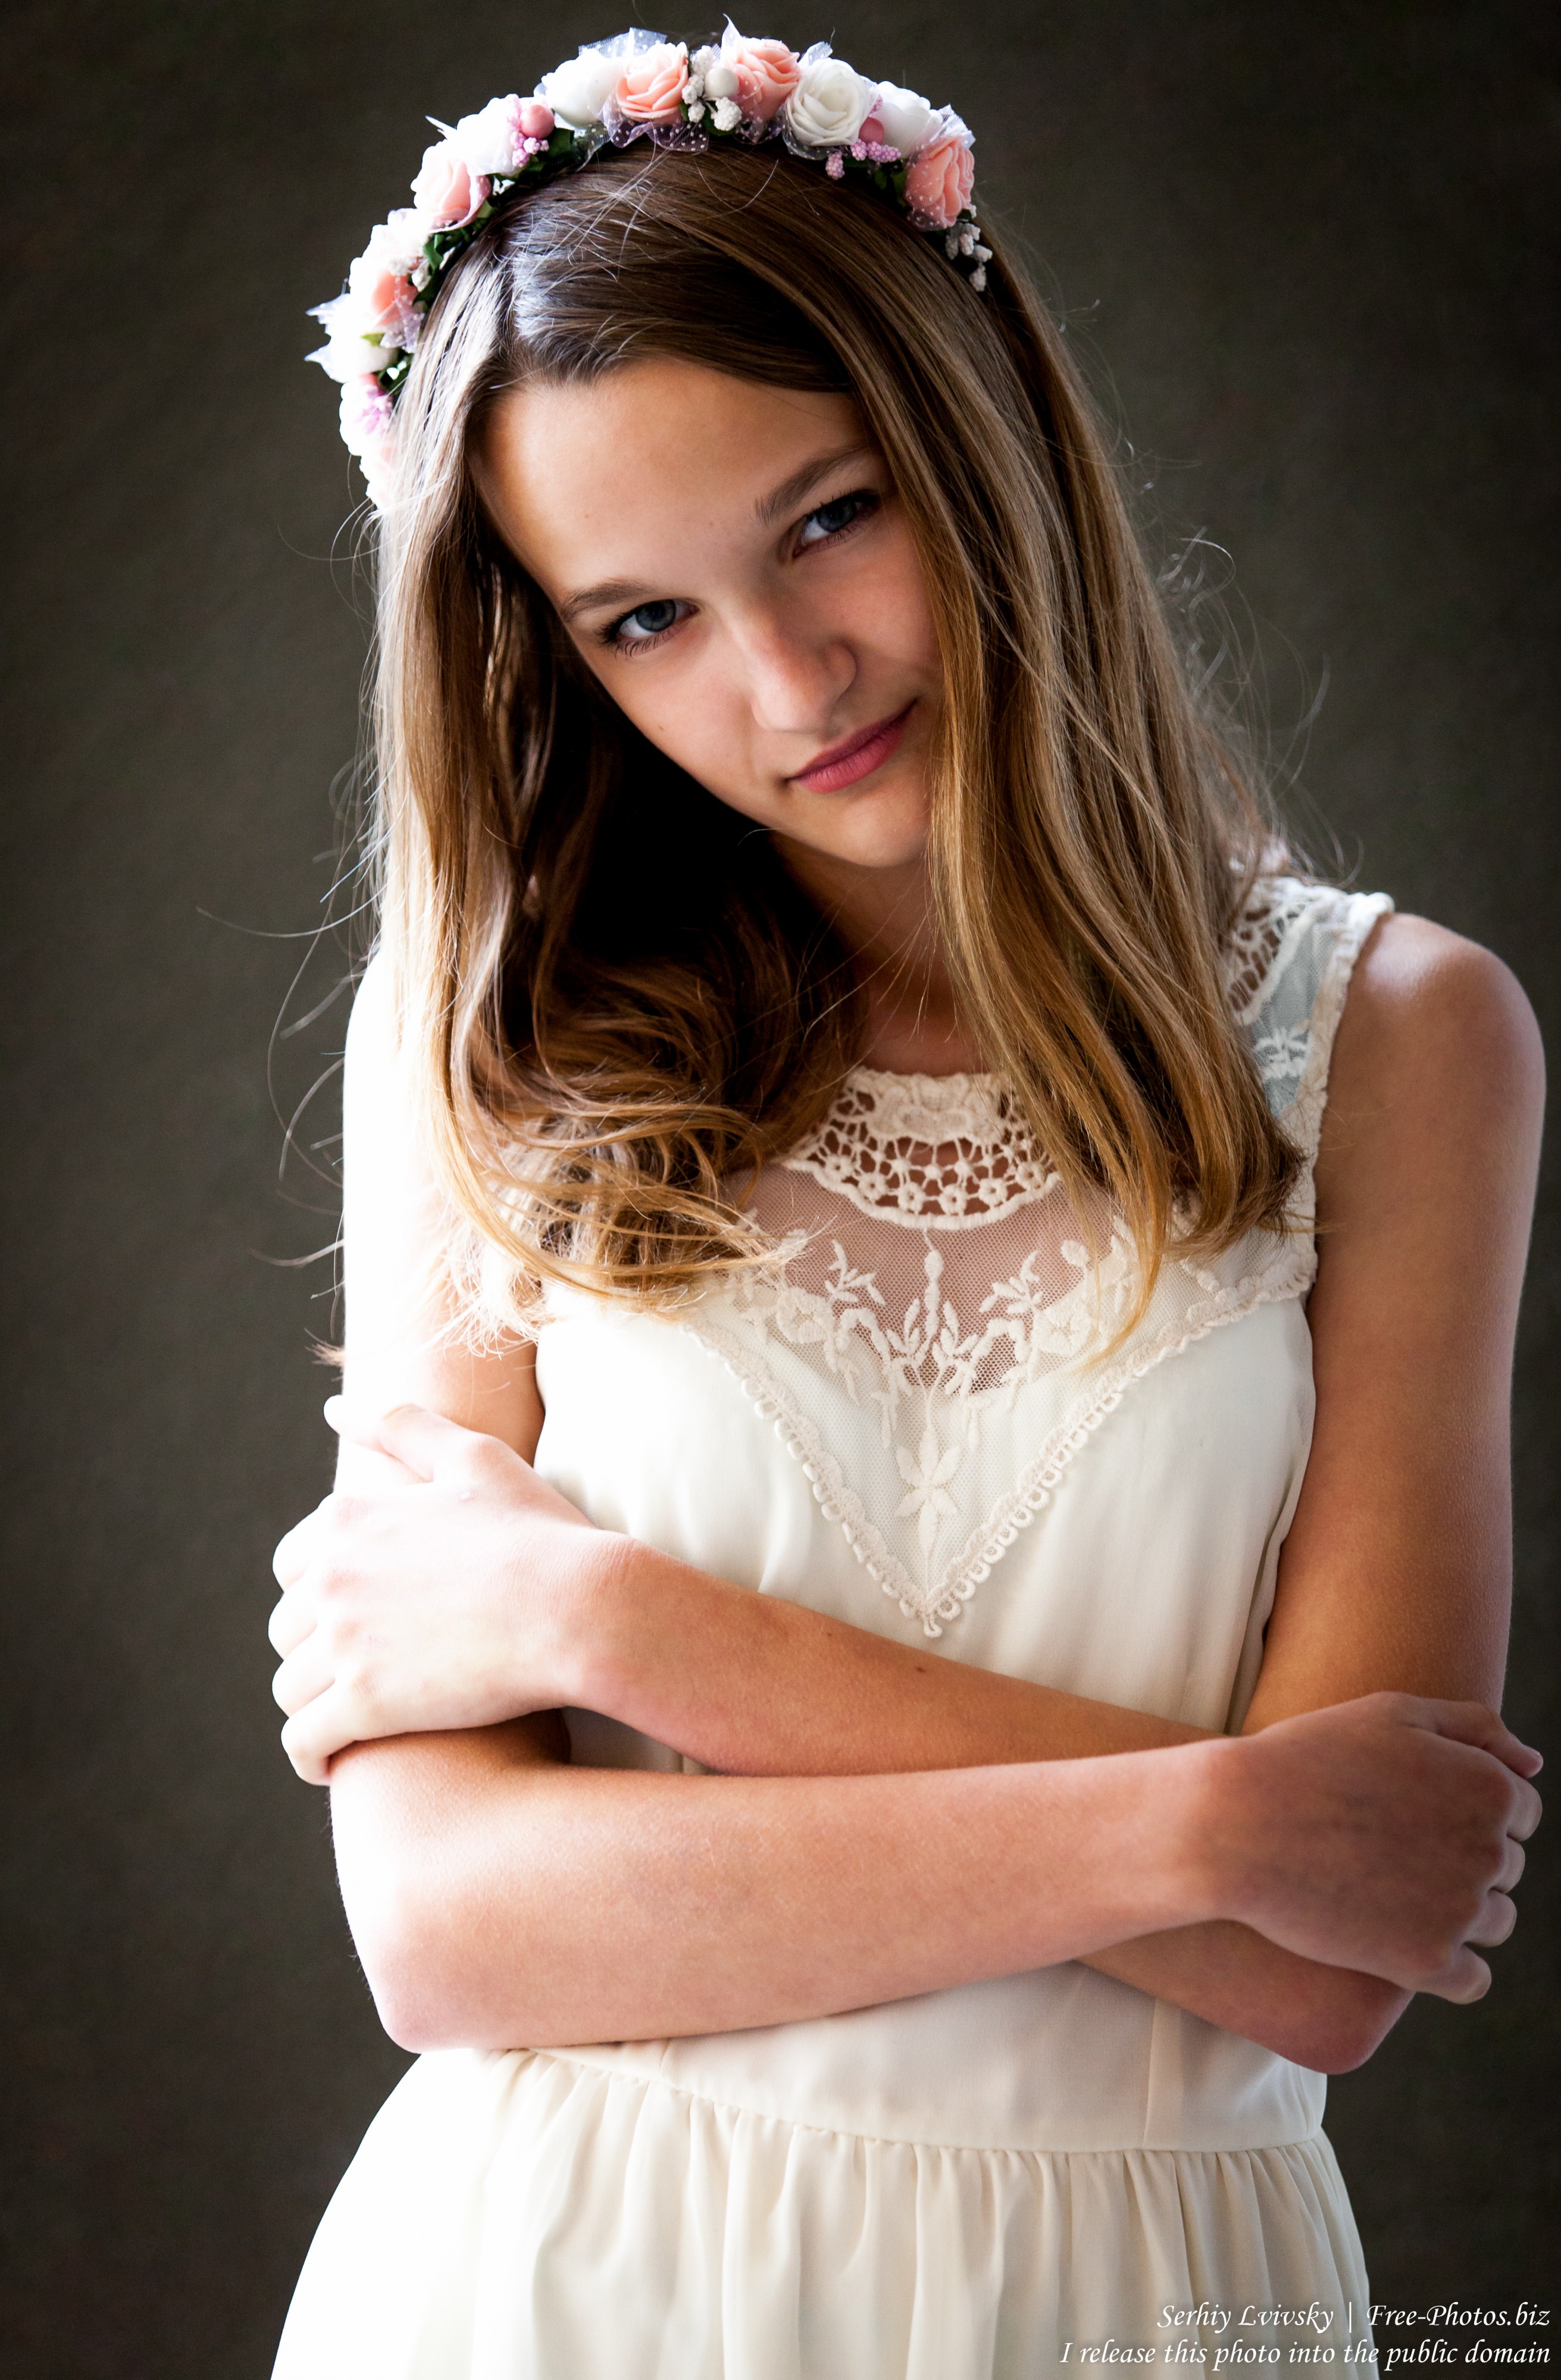 a 13-year-old Catholic girl in a white dress photographed in June 2015, picture 11